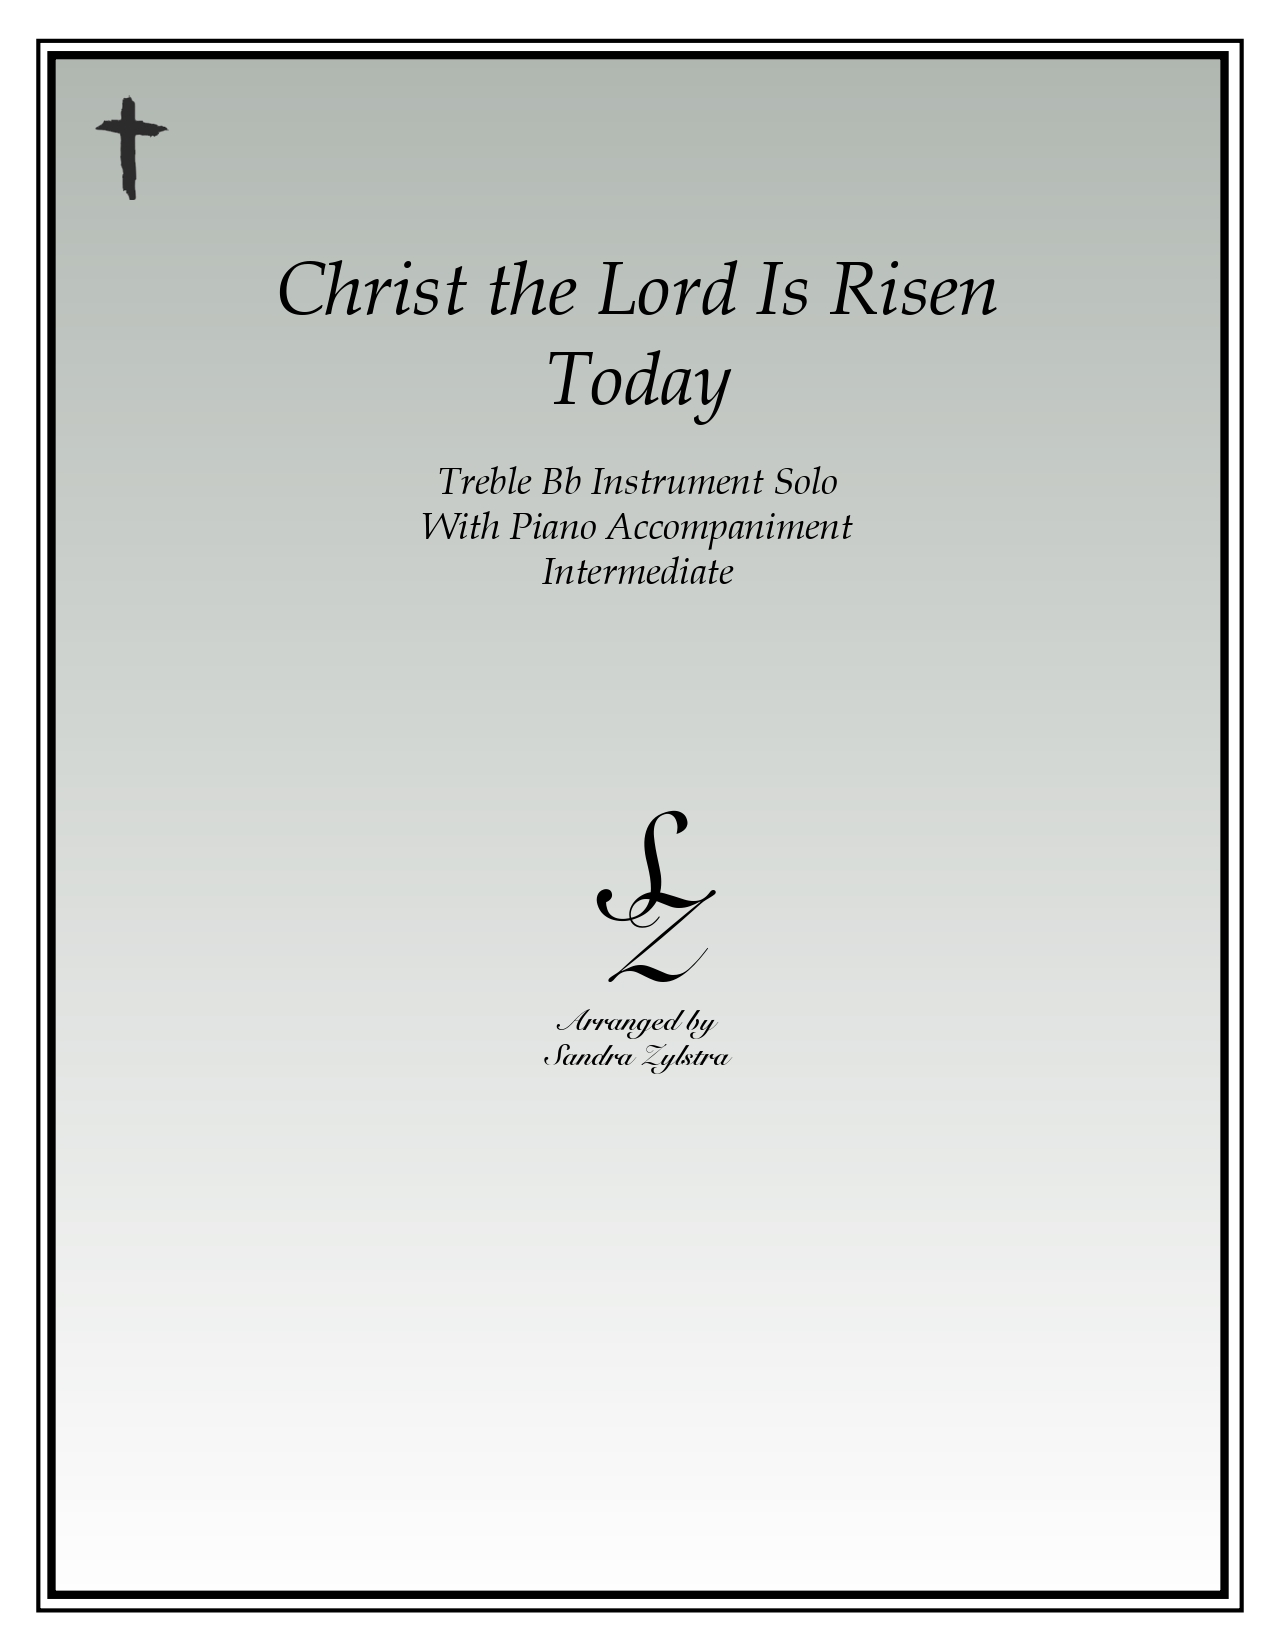 Christ The Lord Is Risen Today Bb instrument solo part cover page 00011